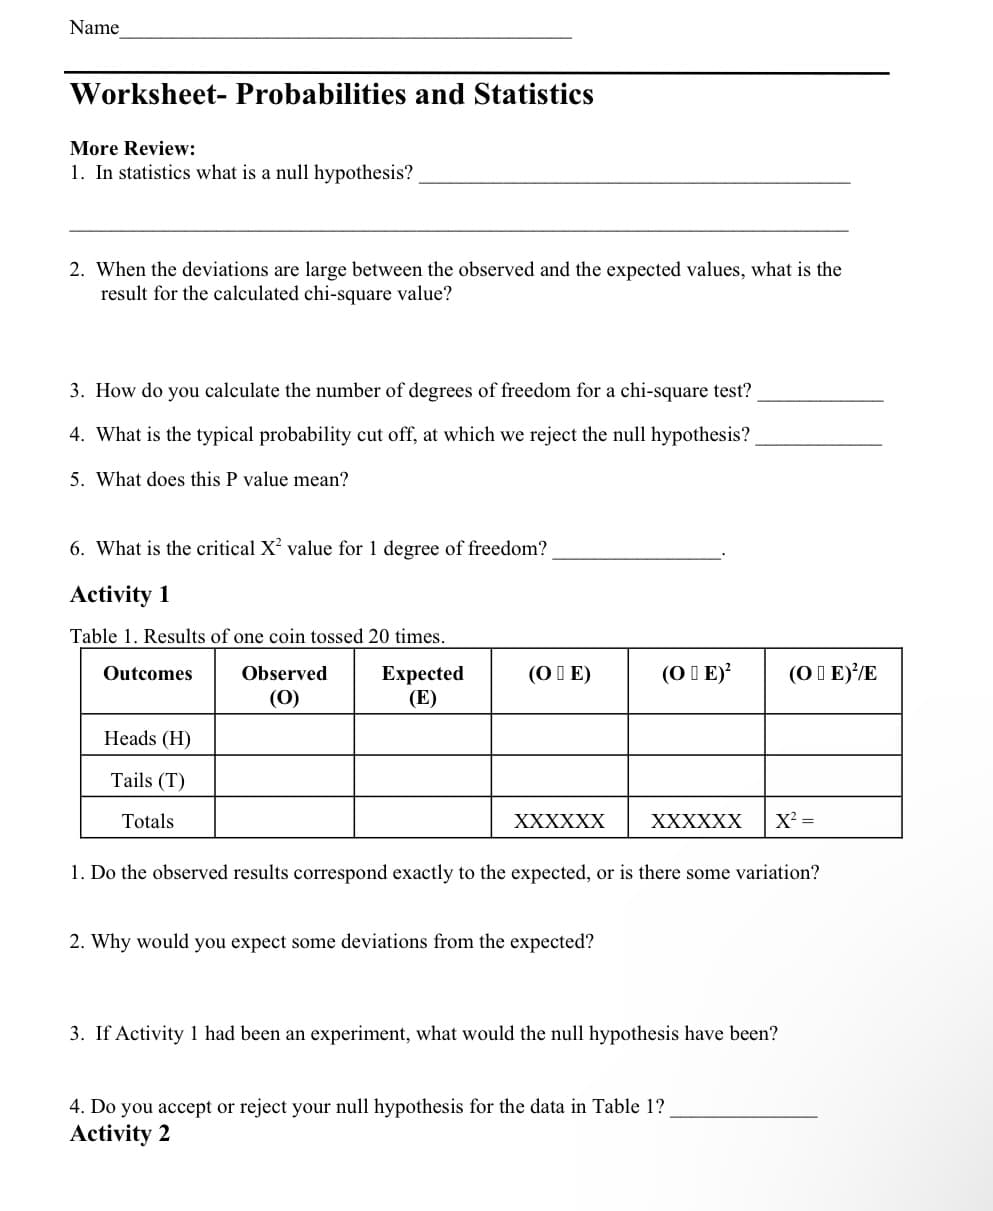 Name
Worksheet- Probabilities and Statistics
More Review:
1. In statistics what is a null hypothesis?
2. When the deviations are large between the observed and the expected values, what is the
result for the calculated chi-square value?
3. How do you calculate the number of degrees of freedom for a chi-square test?
4. What is the typical probability cut off, at which we reject the null hypothesis?
5. What does this P value mean?
6. What is the critical X² value for 1 degree of freedom?
Activity 1
Table 1. Results of one coin tossed 20 times.
Outcomes
Observed
Expected
(E)
(0)
Heads (H)
Tails (T)
Totals
(OIE)
XXXXXX
(OE)² (OE)//E
2. Why would you expect some deviations from the expected?
XXXXXX X² =
1. Do the observed results correspond exactly to the expected, or is there some variation?
3. If Activity 1 had been an experiment, what would the null hypothesis have been?
4. Do you accept or reject your null hypothesis for the data in Table 1?
Activity 2